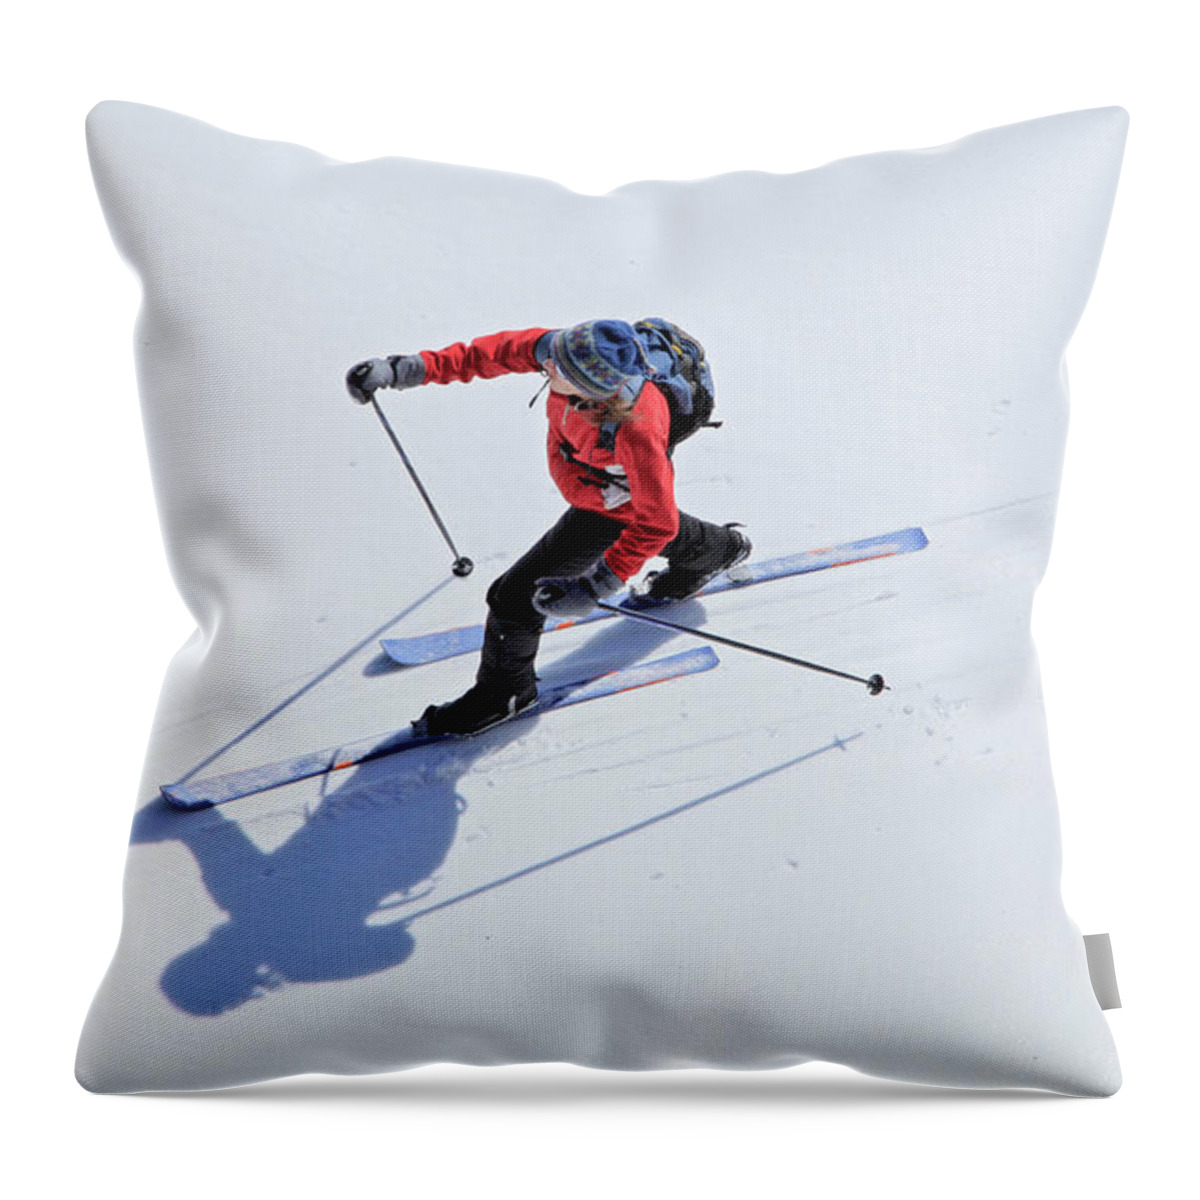 Ski Pole Throw Pillow featuring the photograph Treetop Aerial View Of Cross Country by Johnathan A. Esper, Wildernesscapes Photography